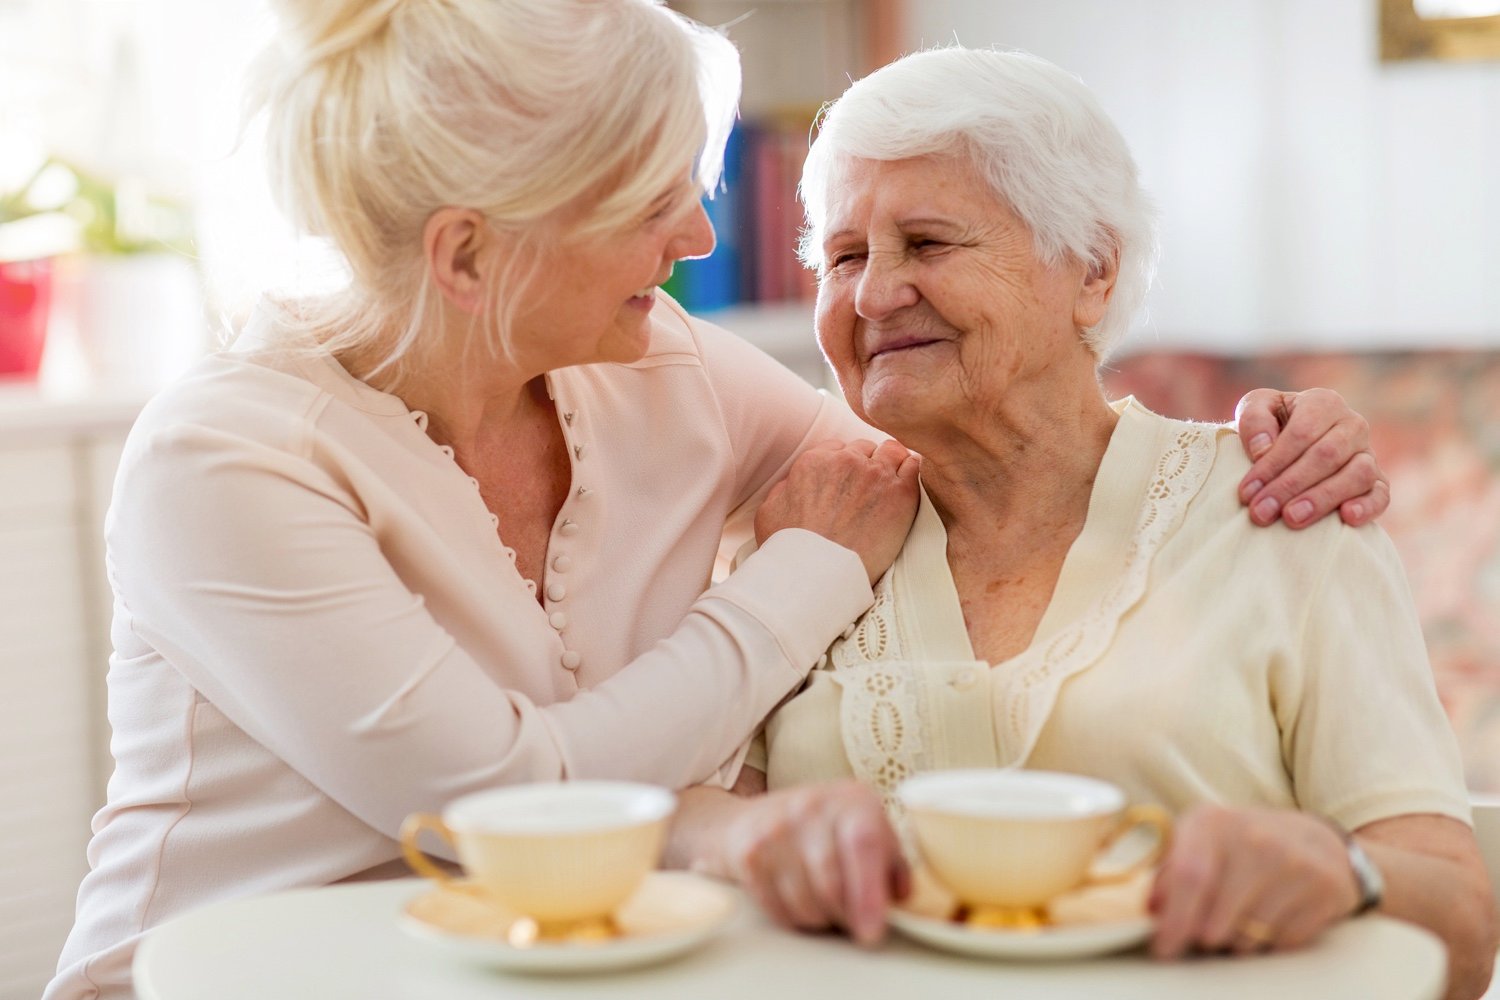 Senior woman spending quality time with staff member